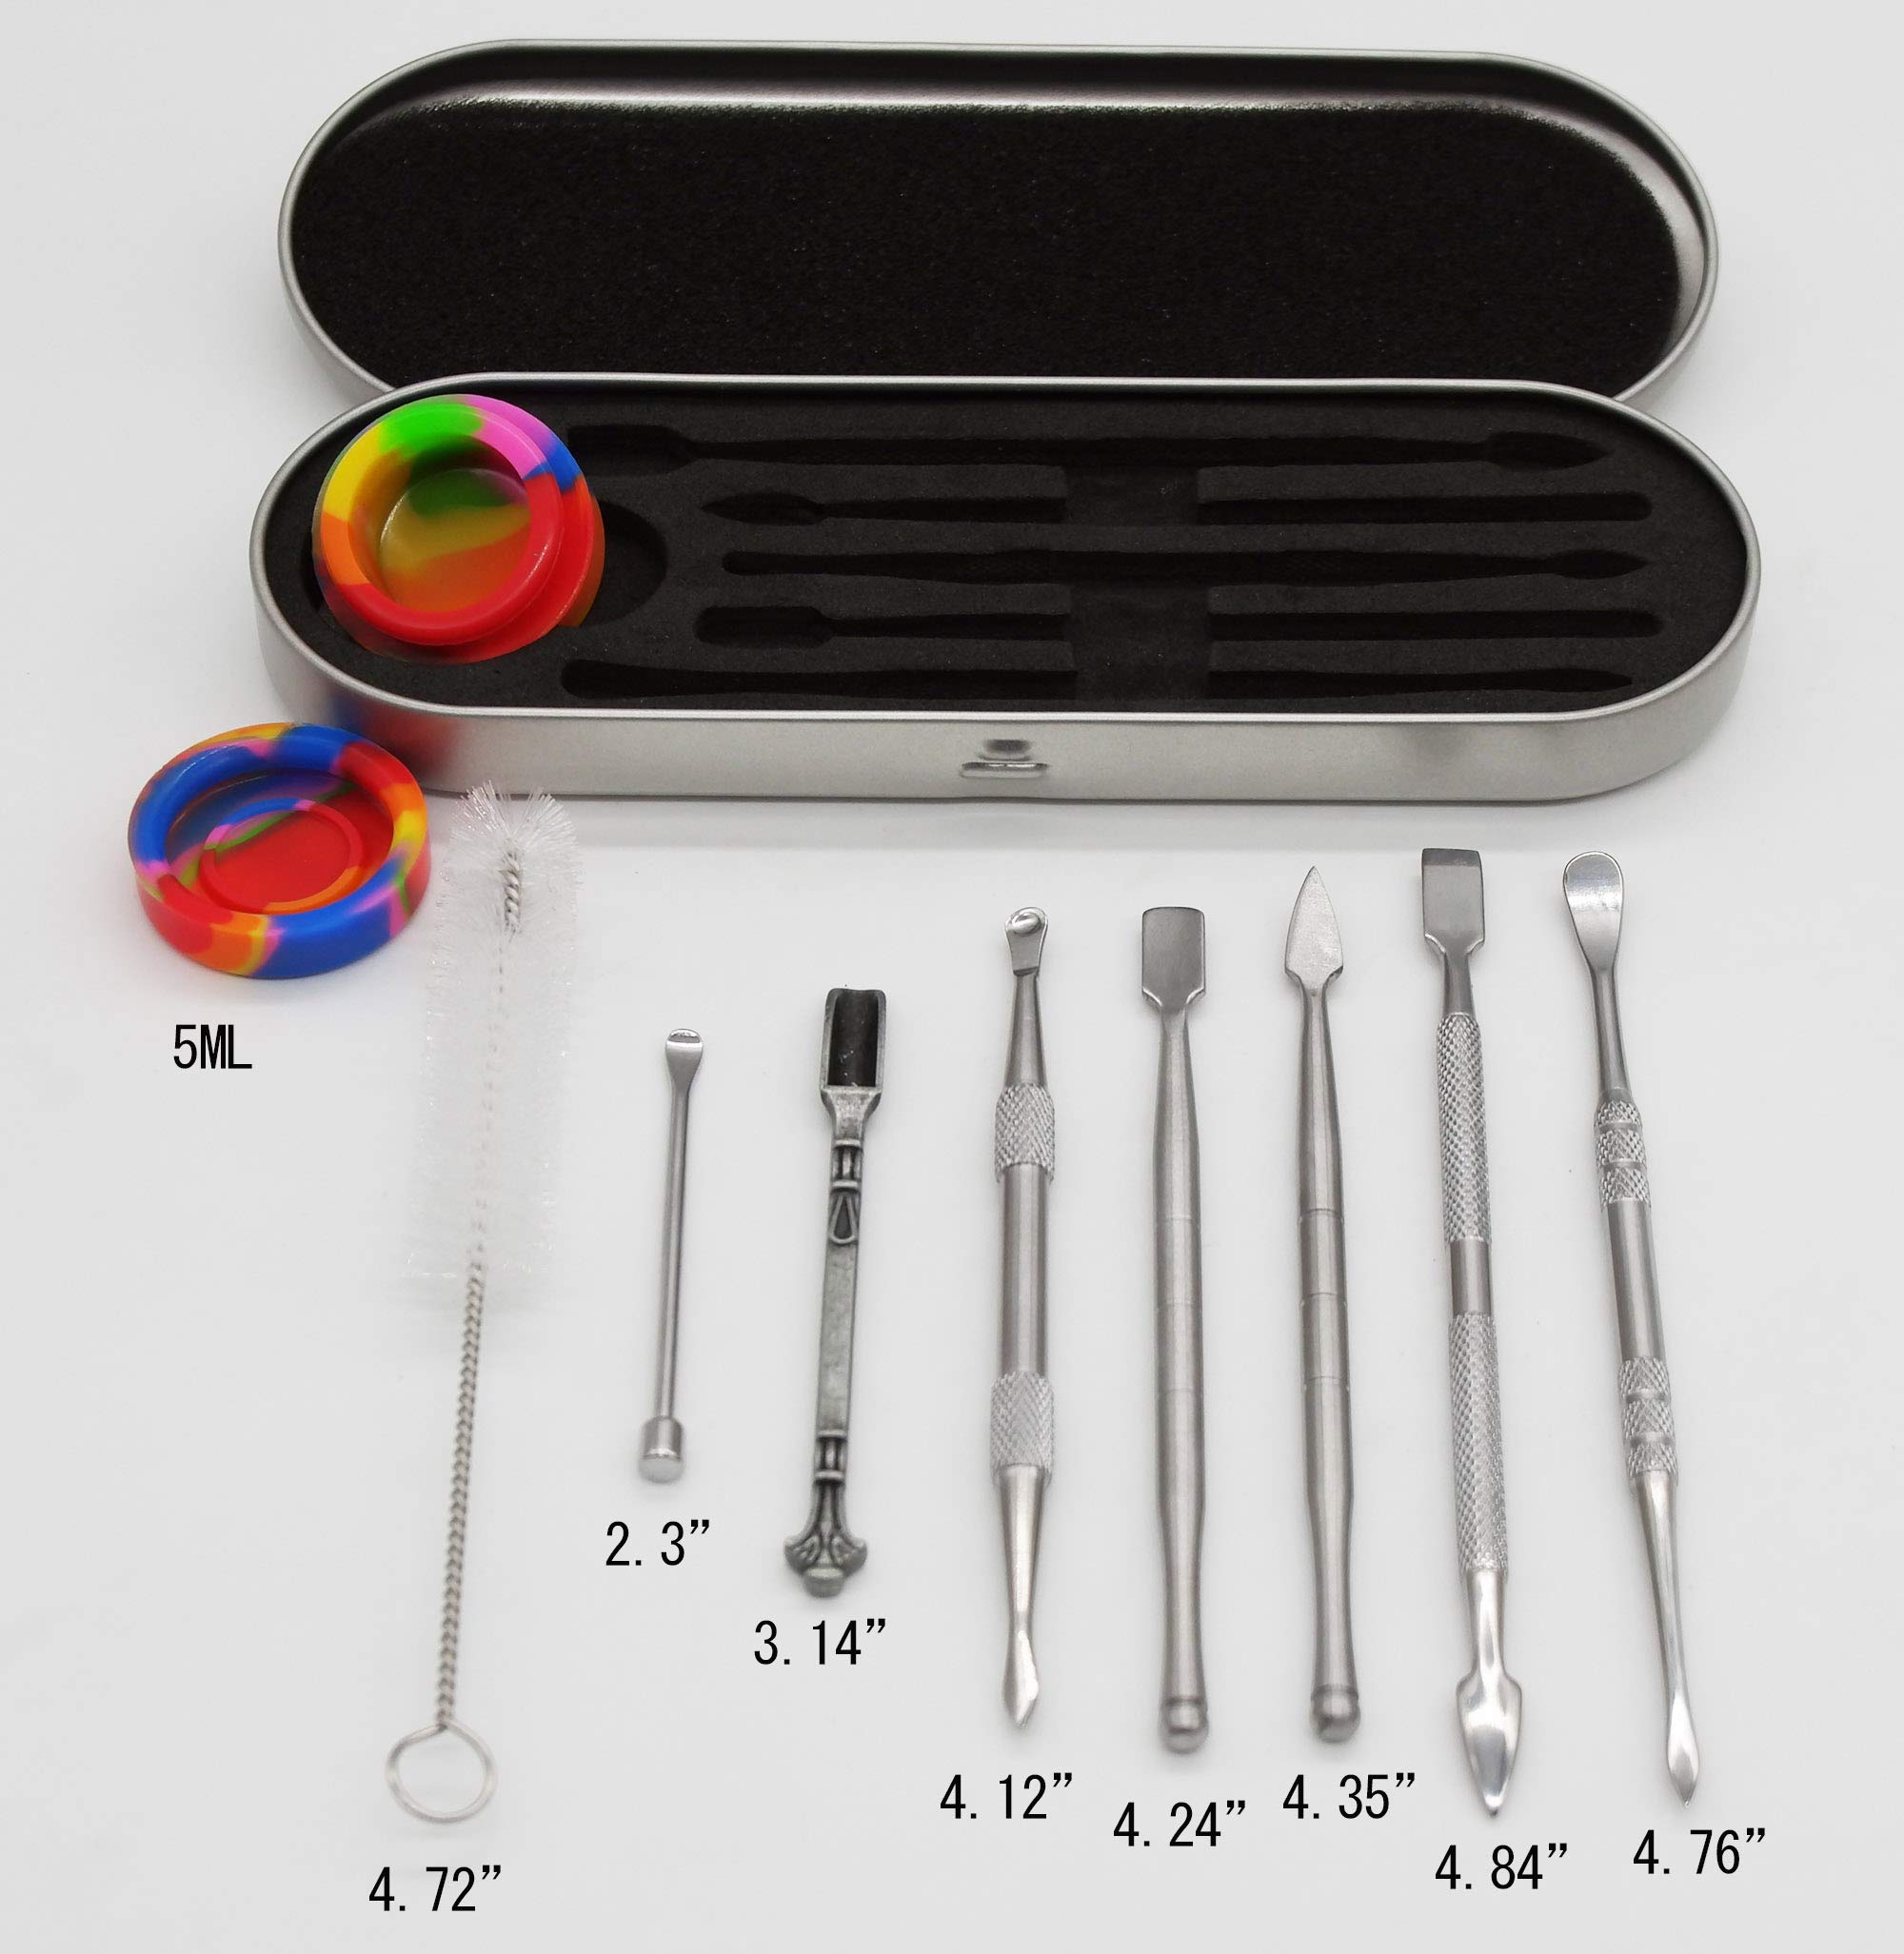 Vitakiwi Wax Carving Stainless Steel Tool Set with 5ml Silicone Container and Metal Carrying Case